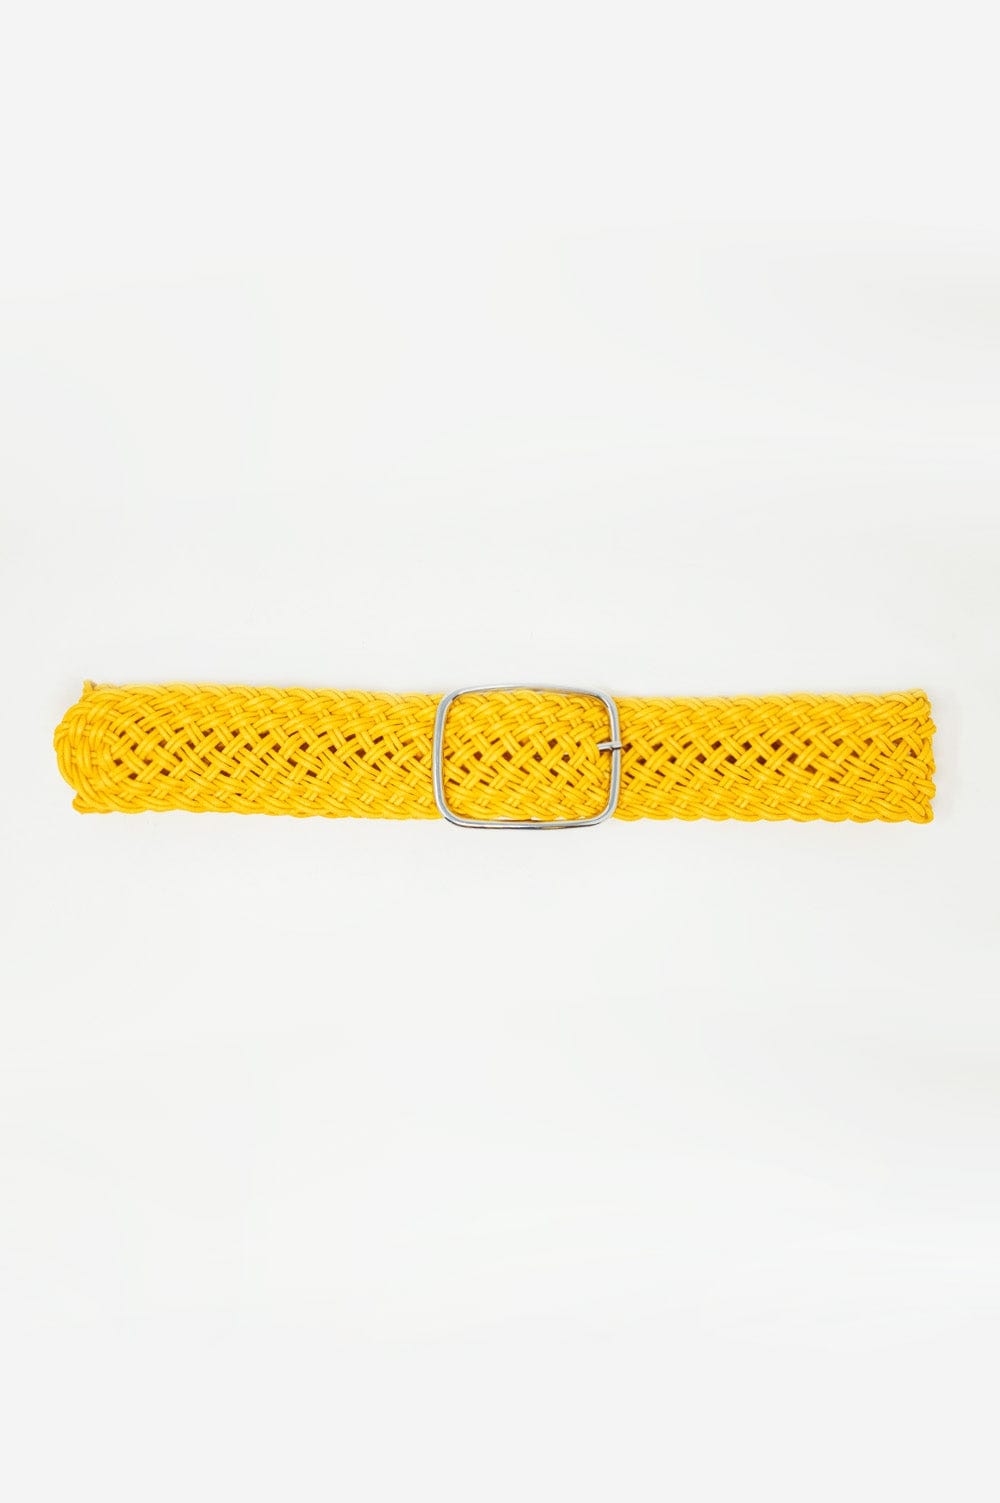 Q2 Women's Belt One Size / Yellow Waist And Hip Belt In 70S Yellow